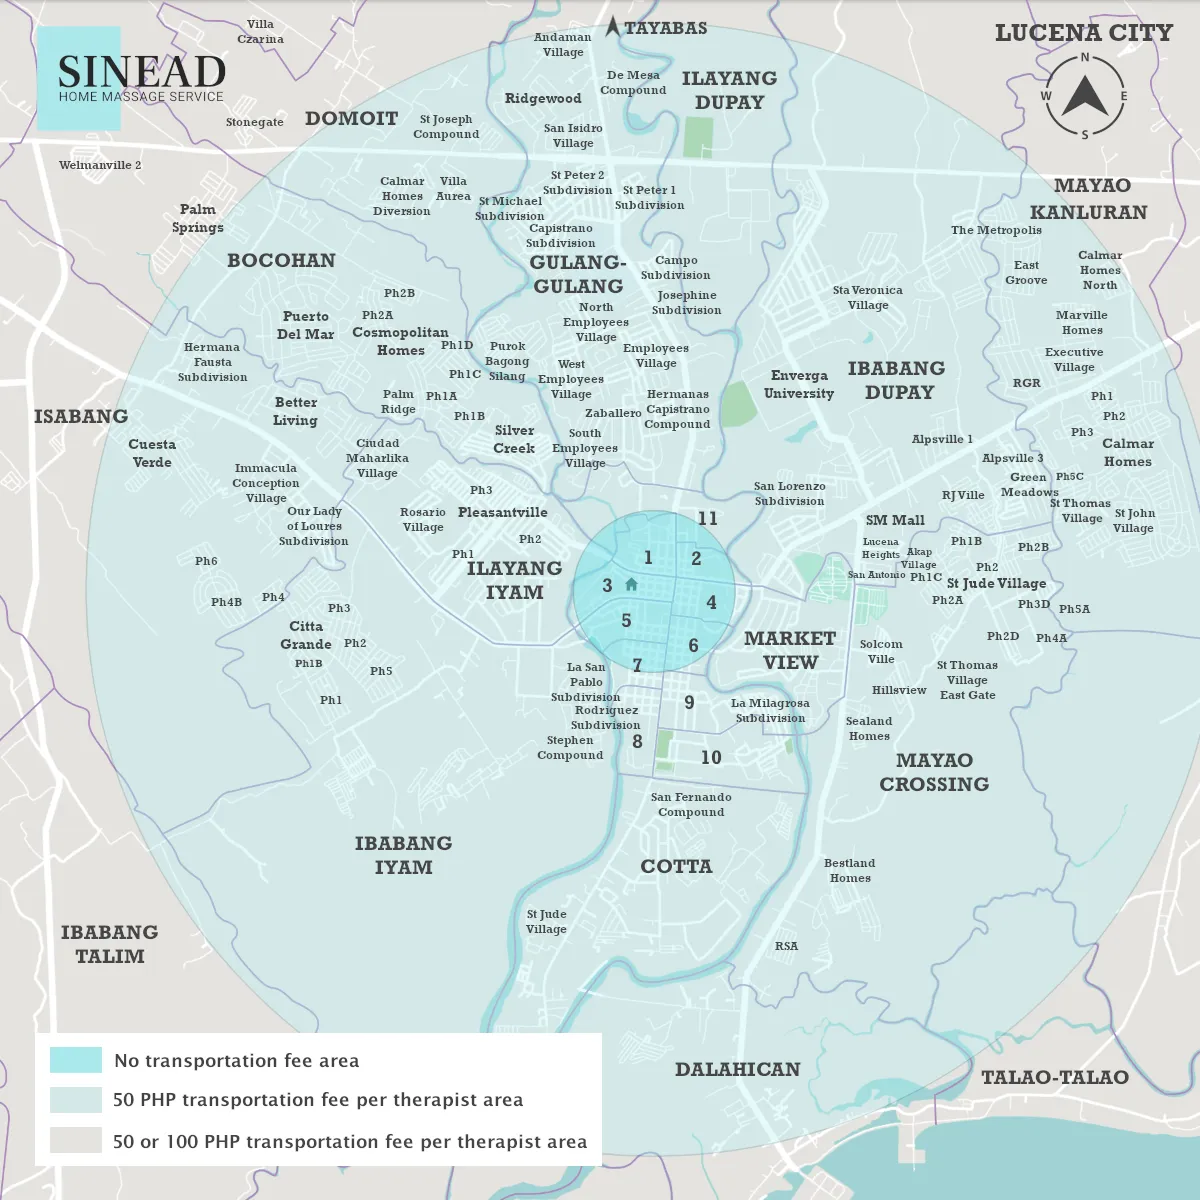 Map of Sinead Home Massage Service Servicing Areas